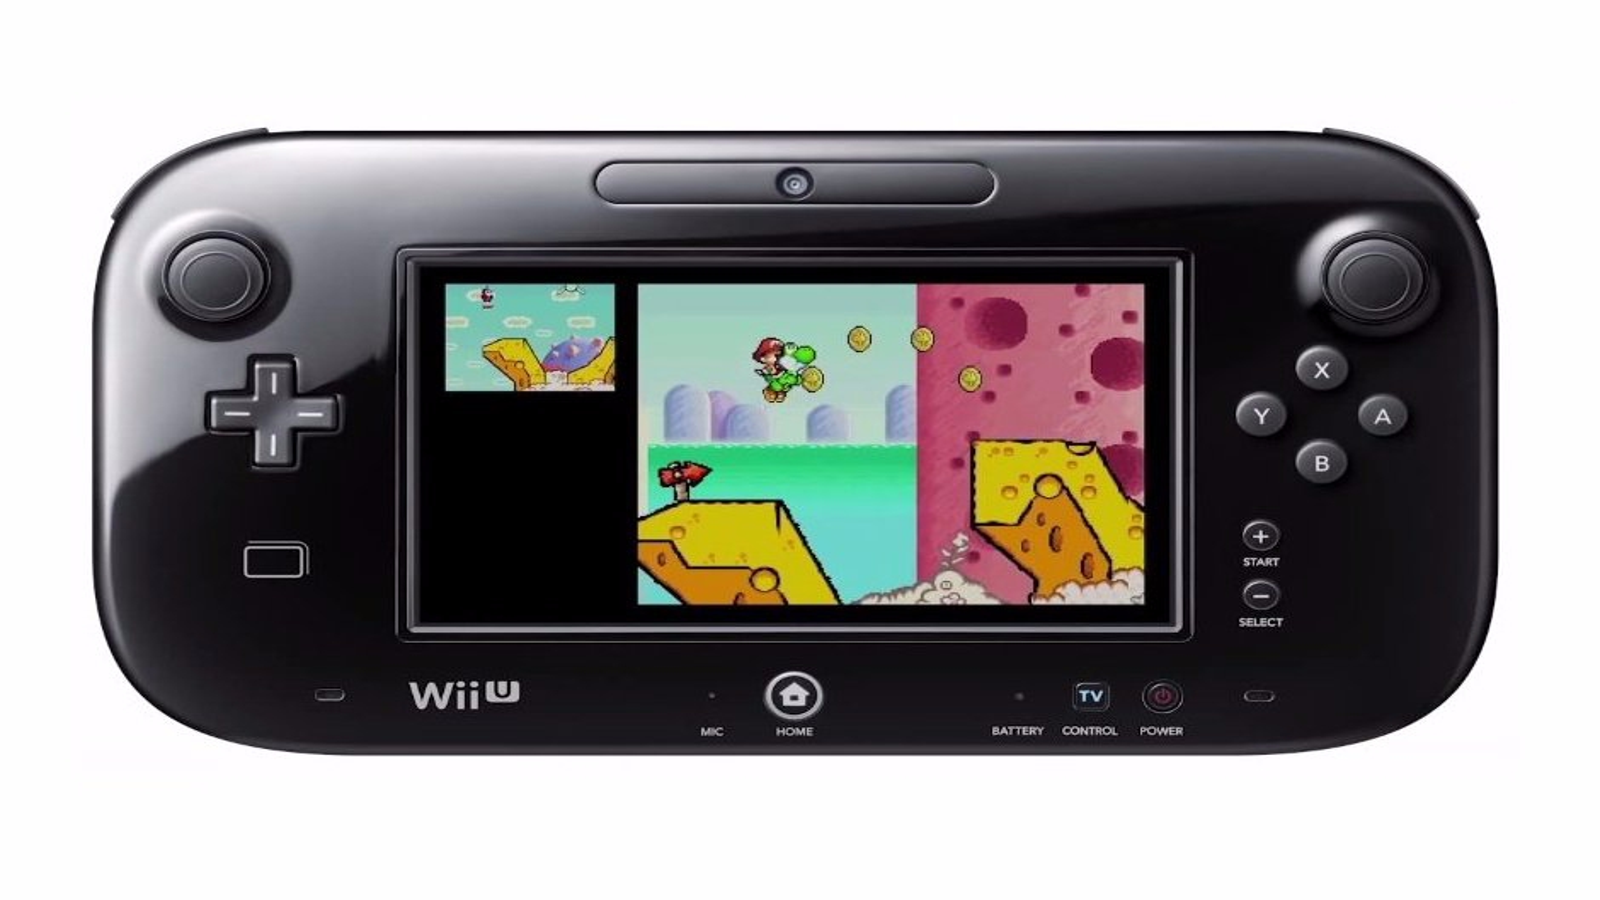 Nintendo 64 and DS Games Coming to Wii U Virtual Console